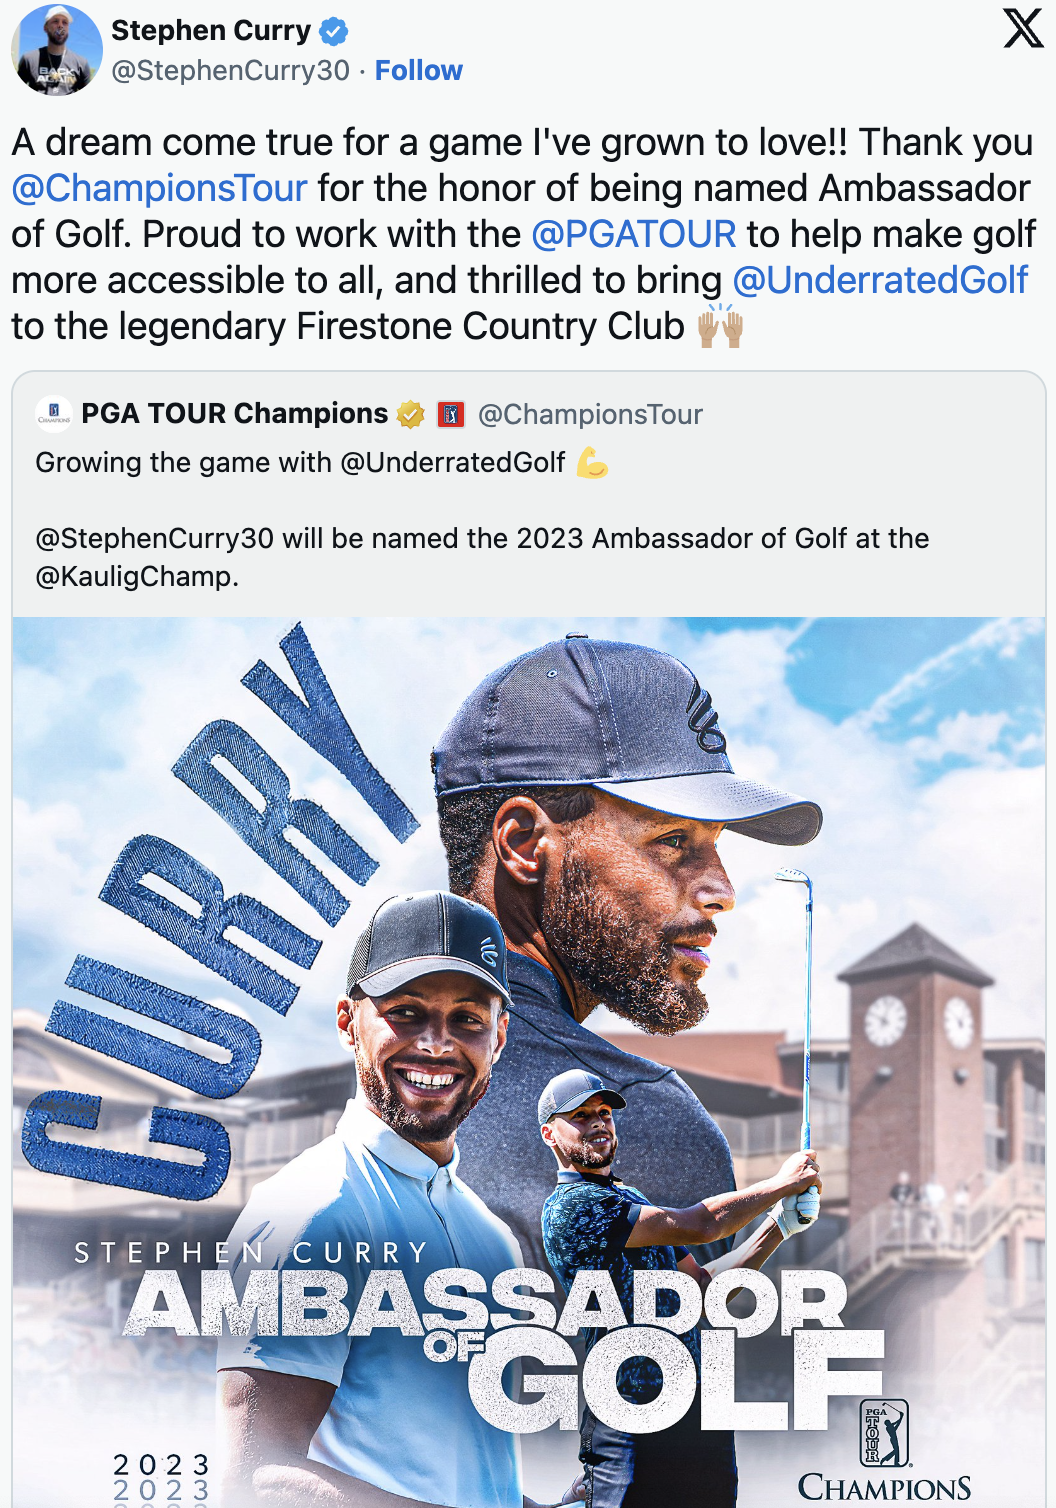 Fans React with Amazement to Stephen Curry's Golf Update on Twitter